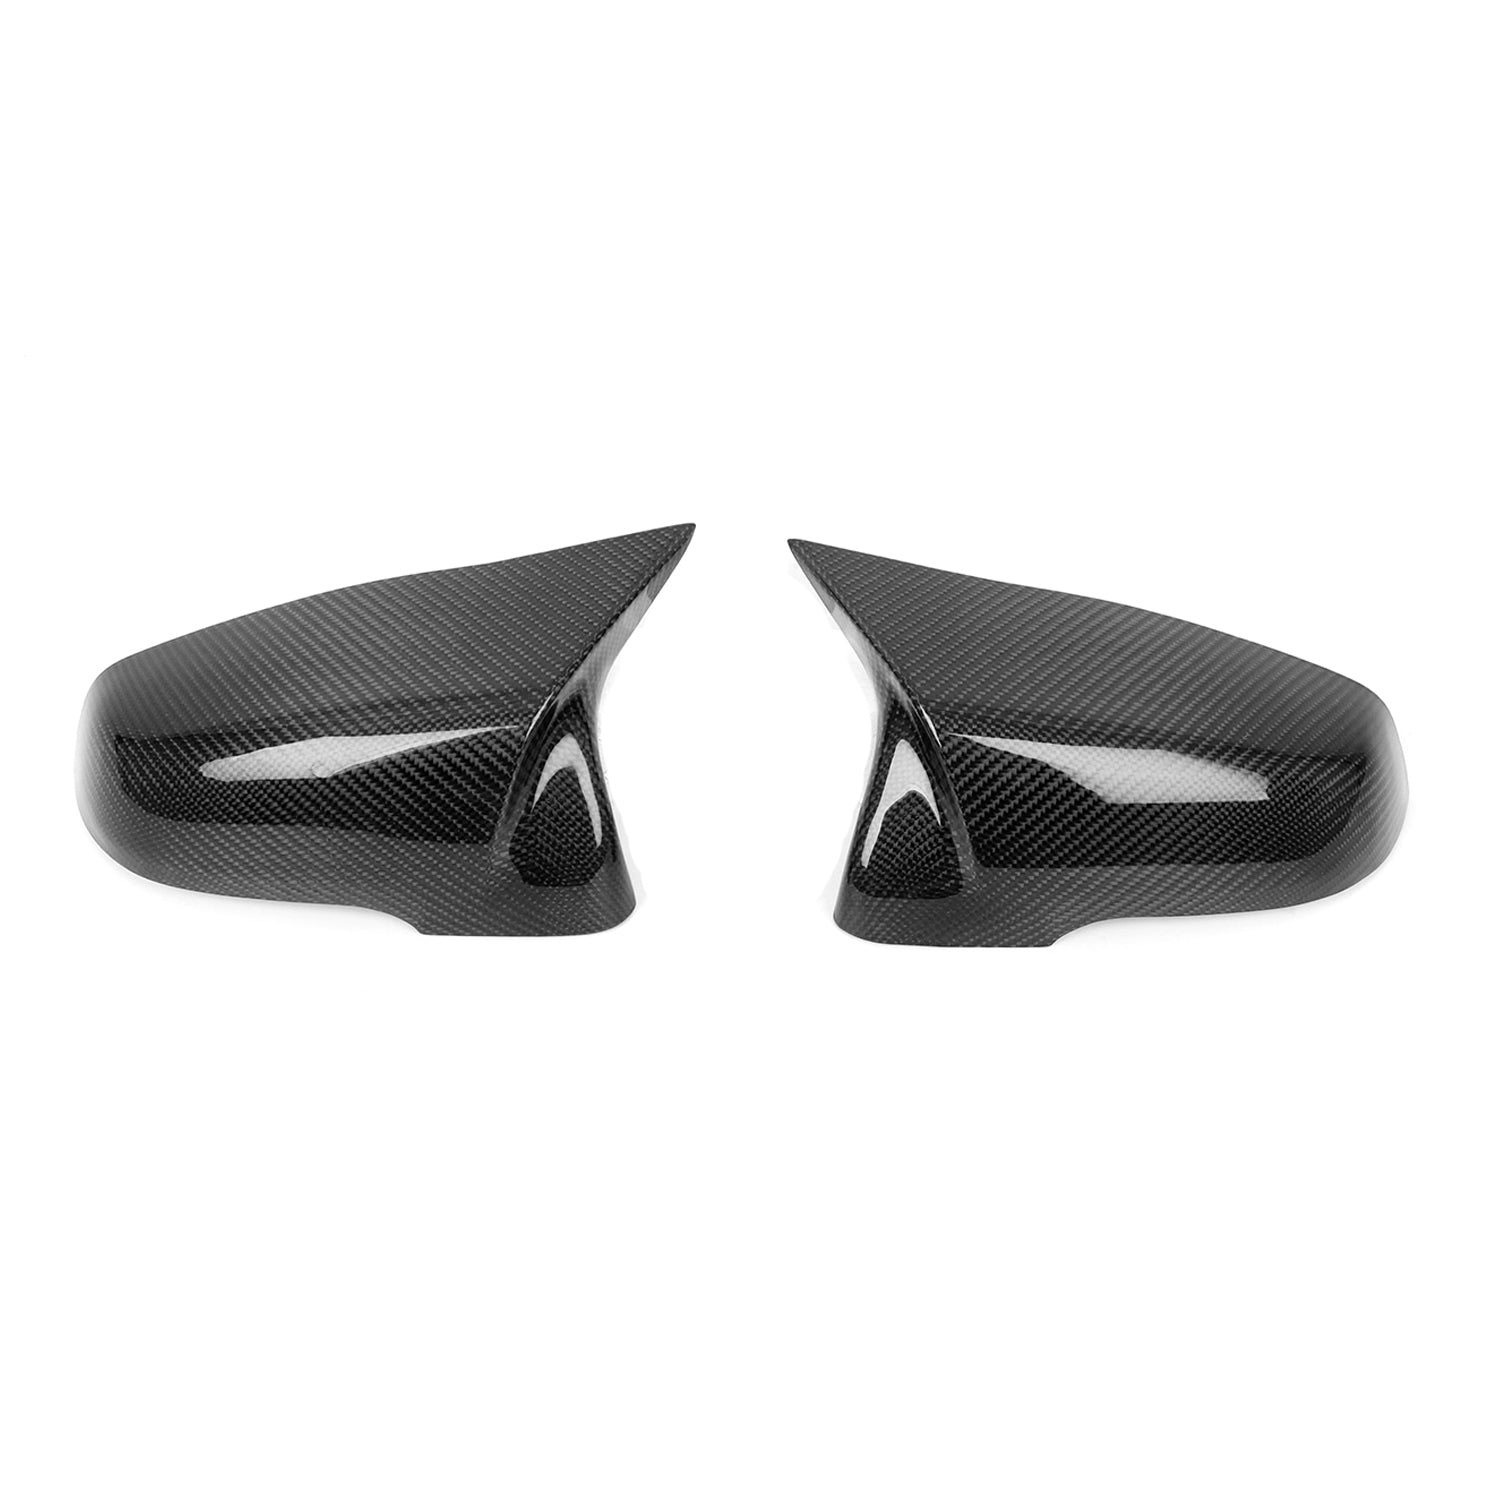 MHC BMW M Style Wing Mirror Covers In Gloss Carbon Fibre (F40/F44/G29/A90 Supra)-R44 Performance